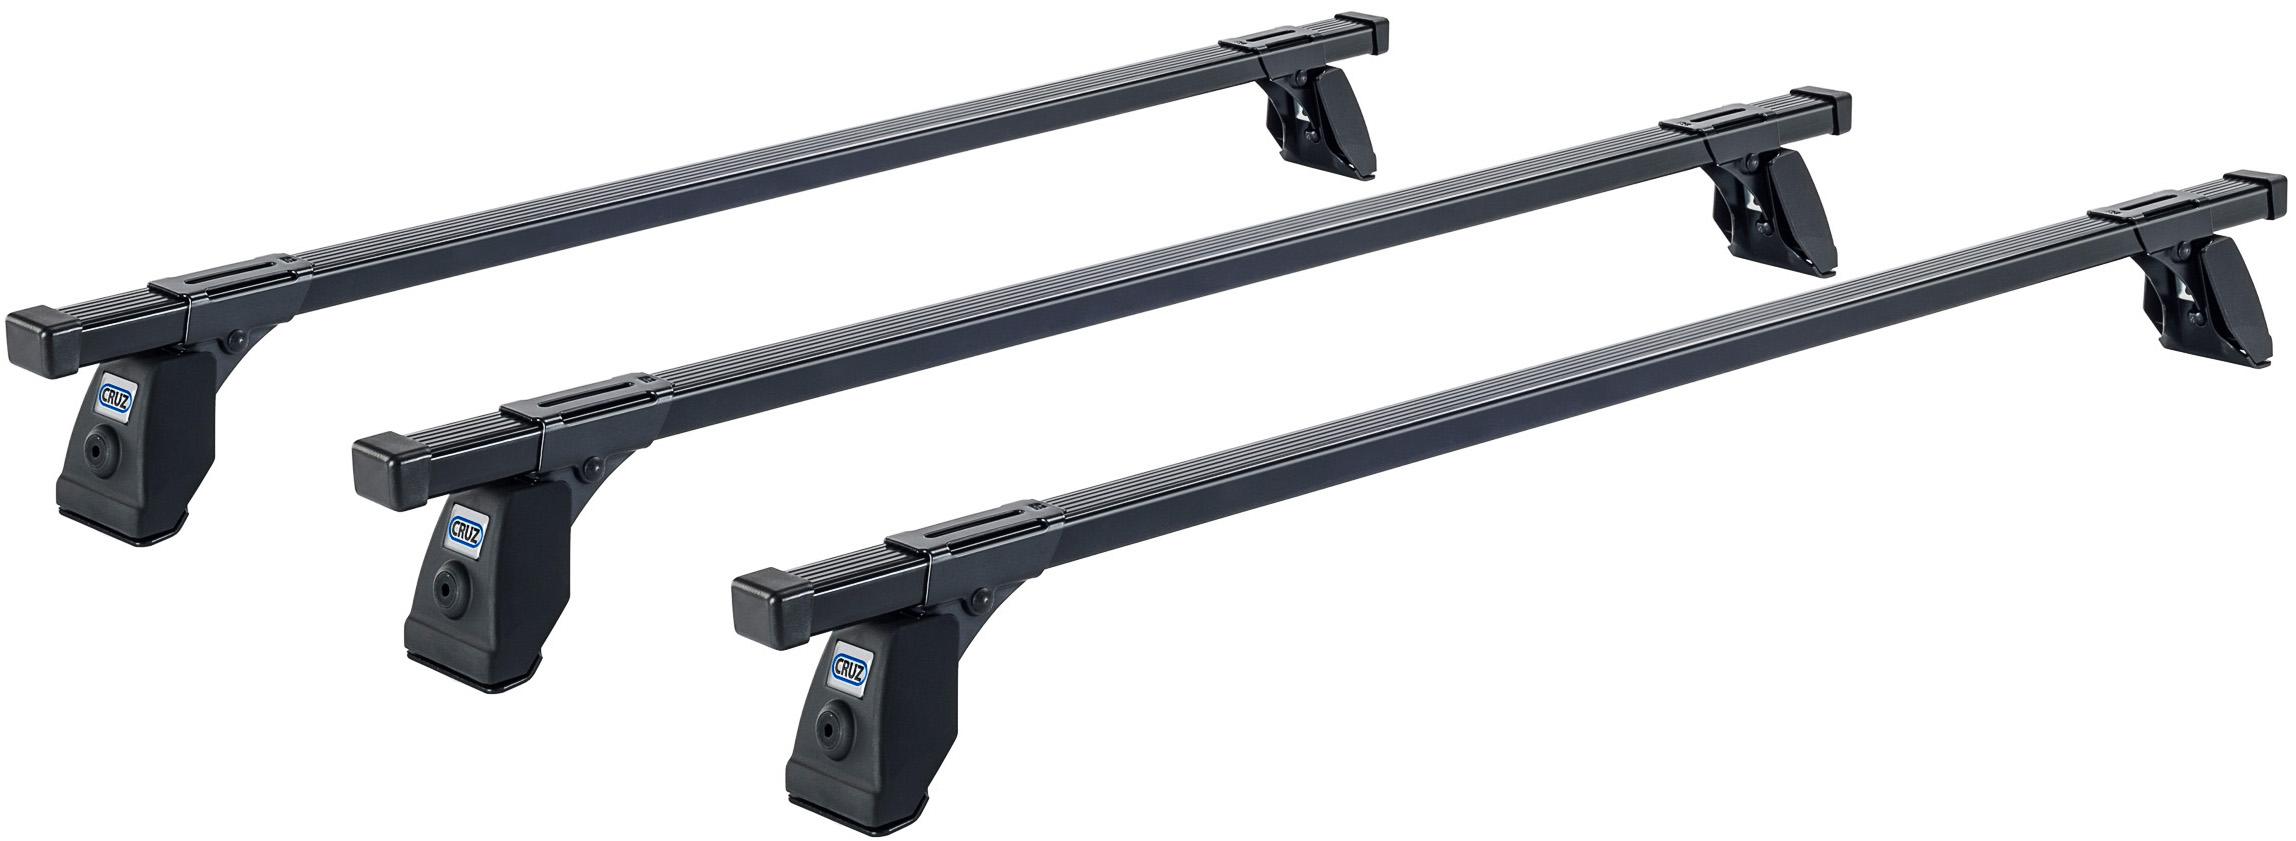 Cruz Commercial Roof Bars 30 X 20 922-442 - Pack Of 3